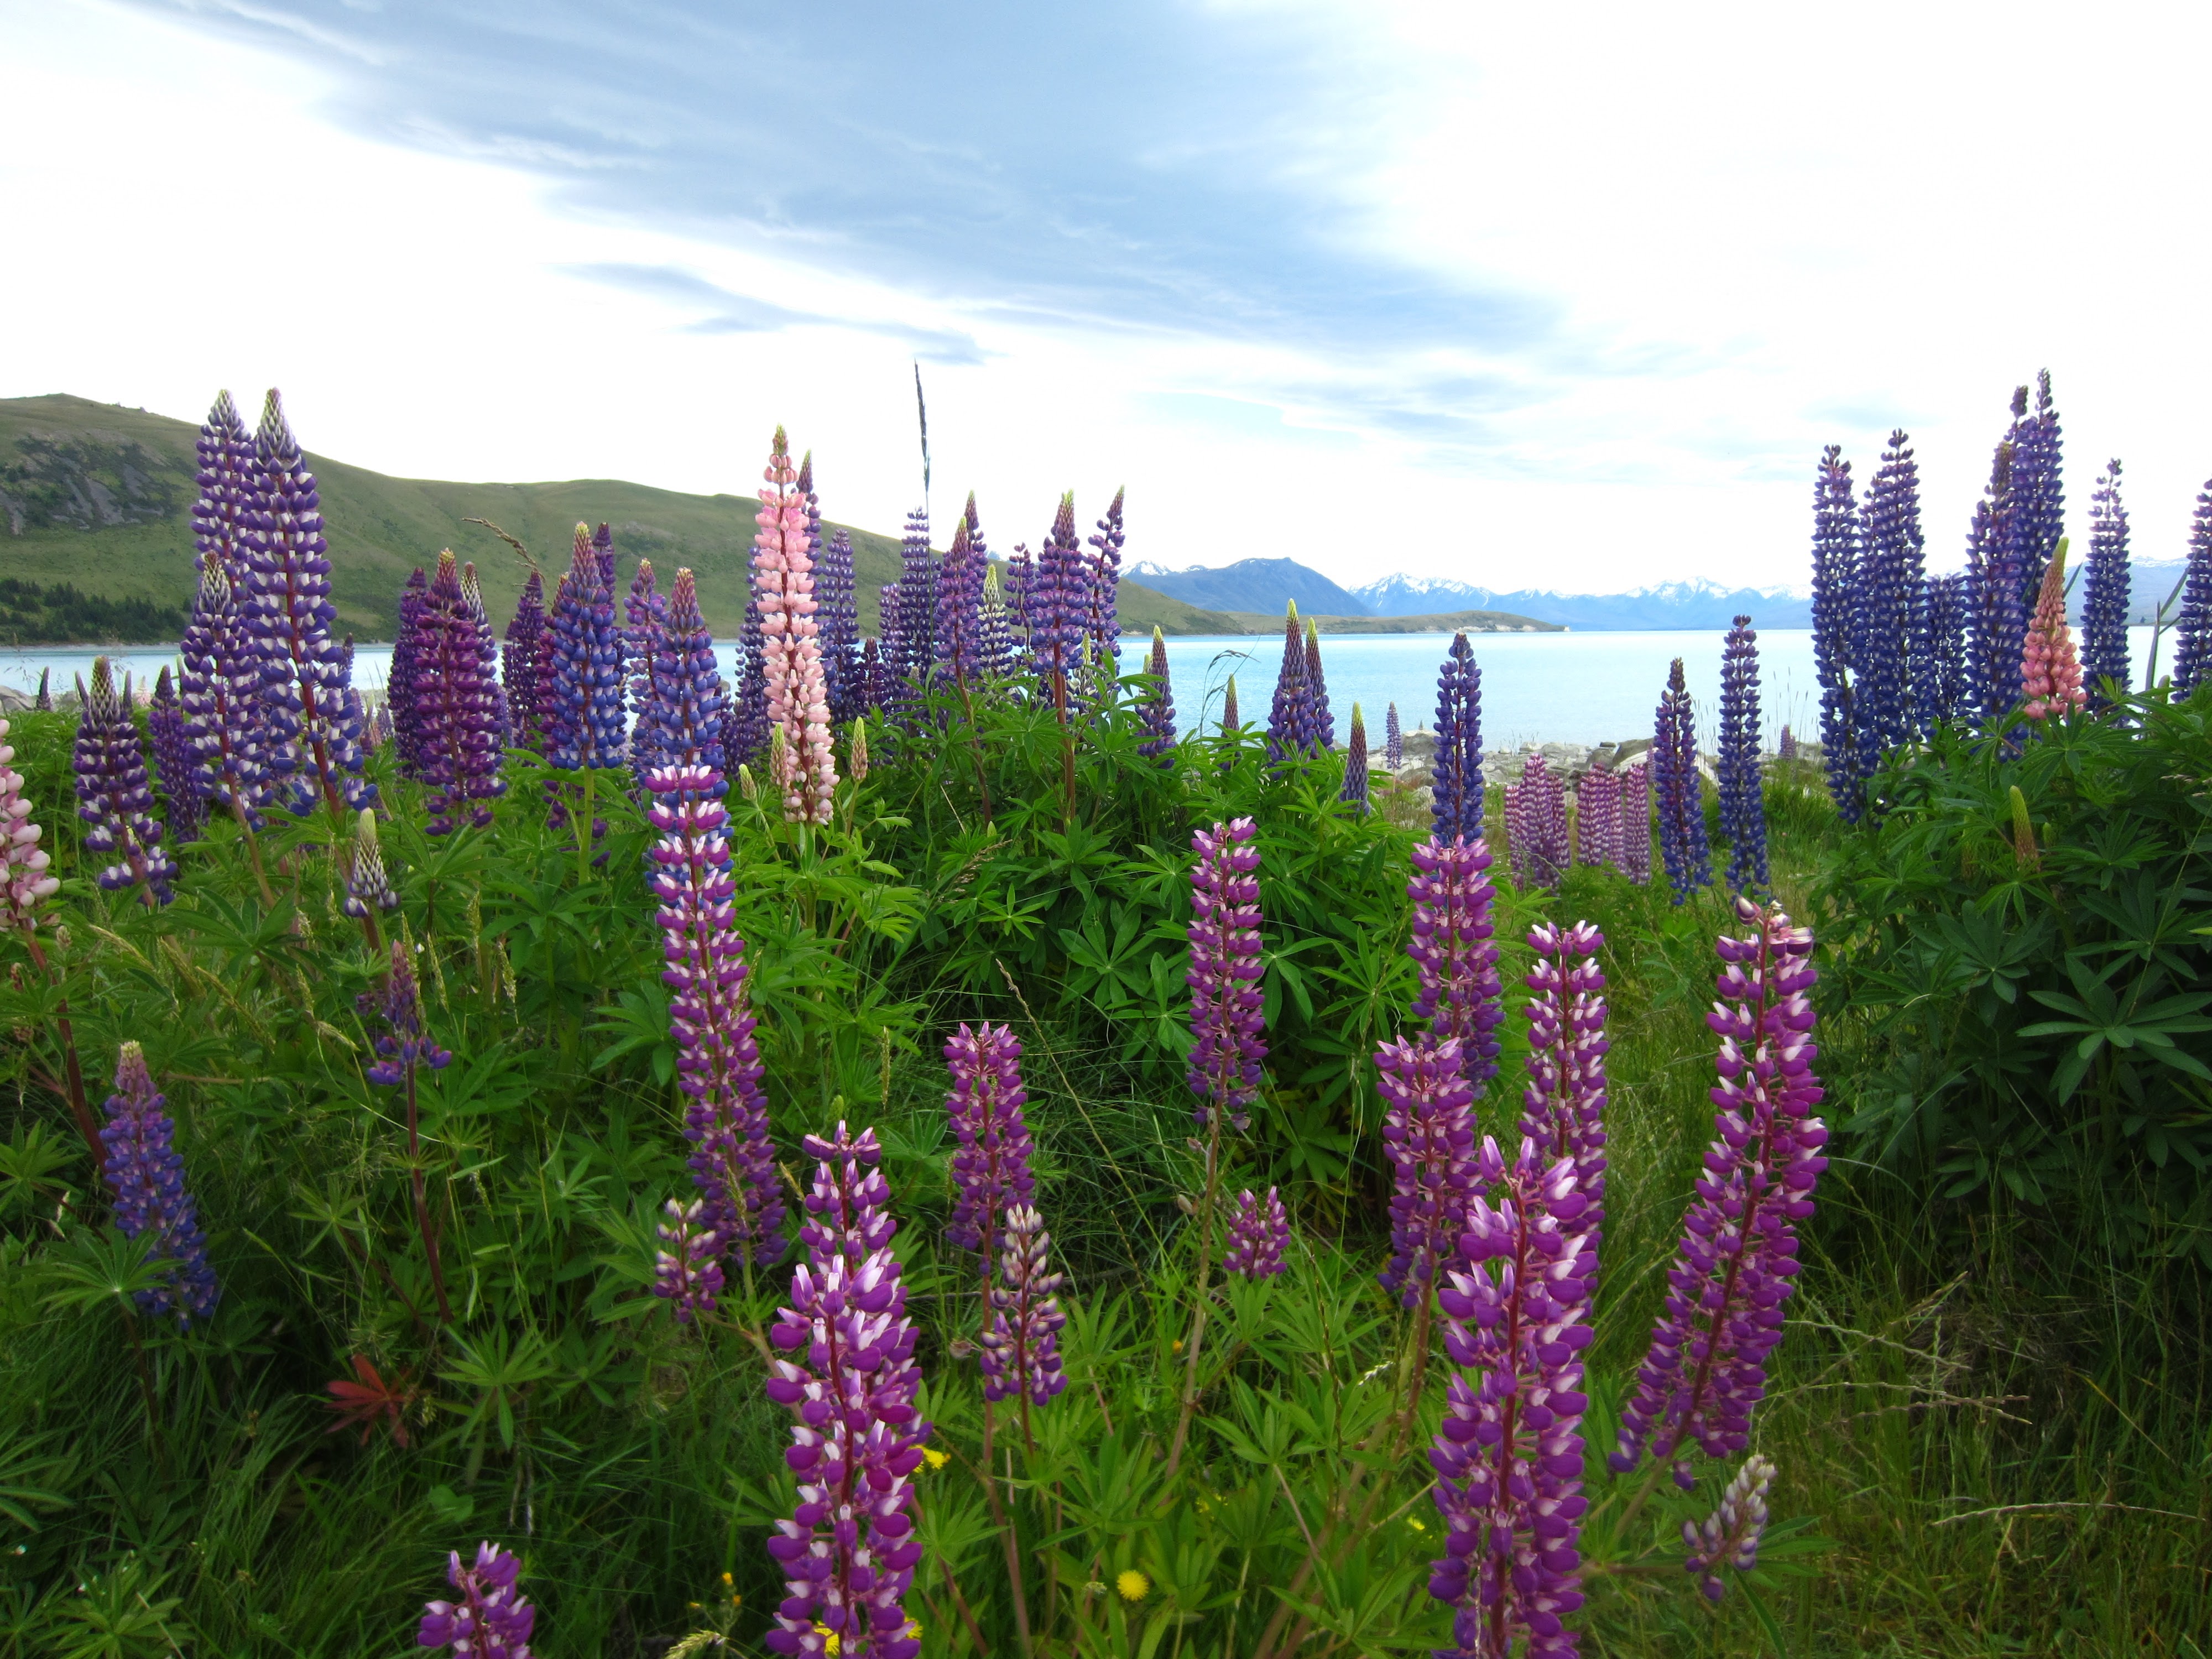 In the foreground are ~65 lupines. They range in color from very light pink to bright reddish purple to a deep blue purple. They are surrounded by lush bright green plants, including lupine leaves. Behind the lupines is a sky blue lake. Beyond the lake on the left is a green hill. Beyond the lake on the right, much further away, are snow covered mountains. The sky in the photograph appears white. 